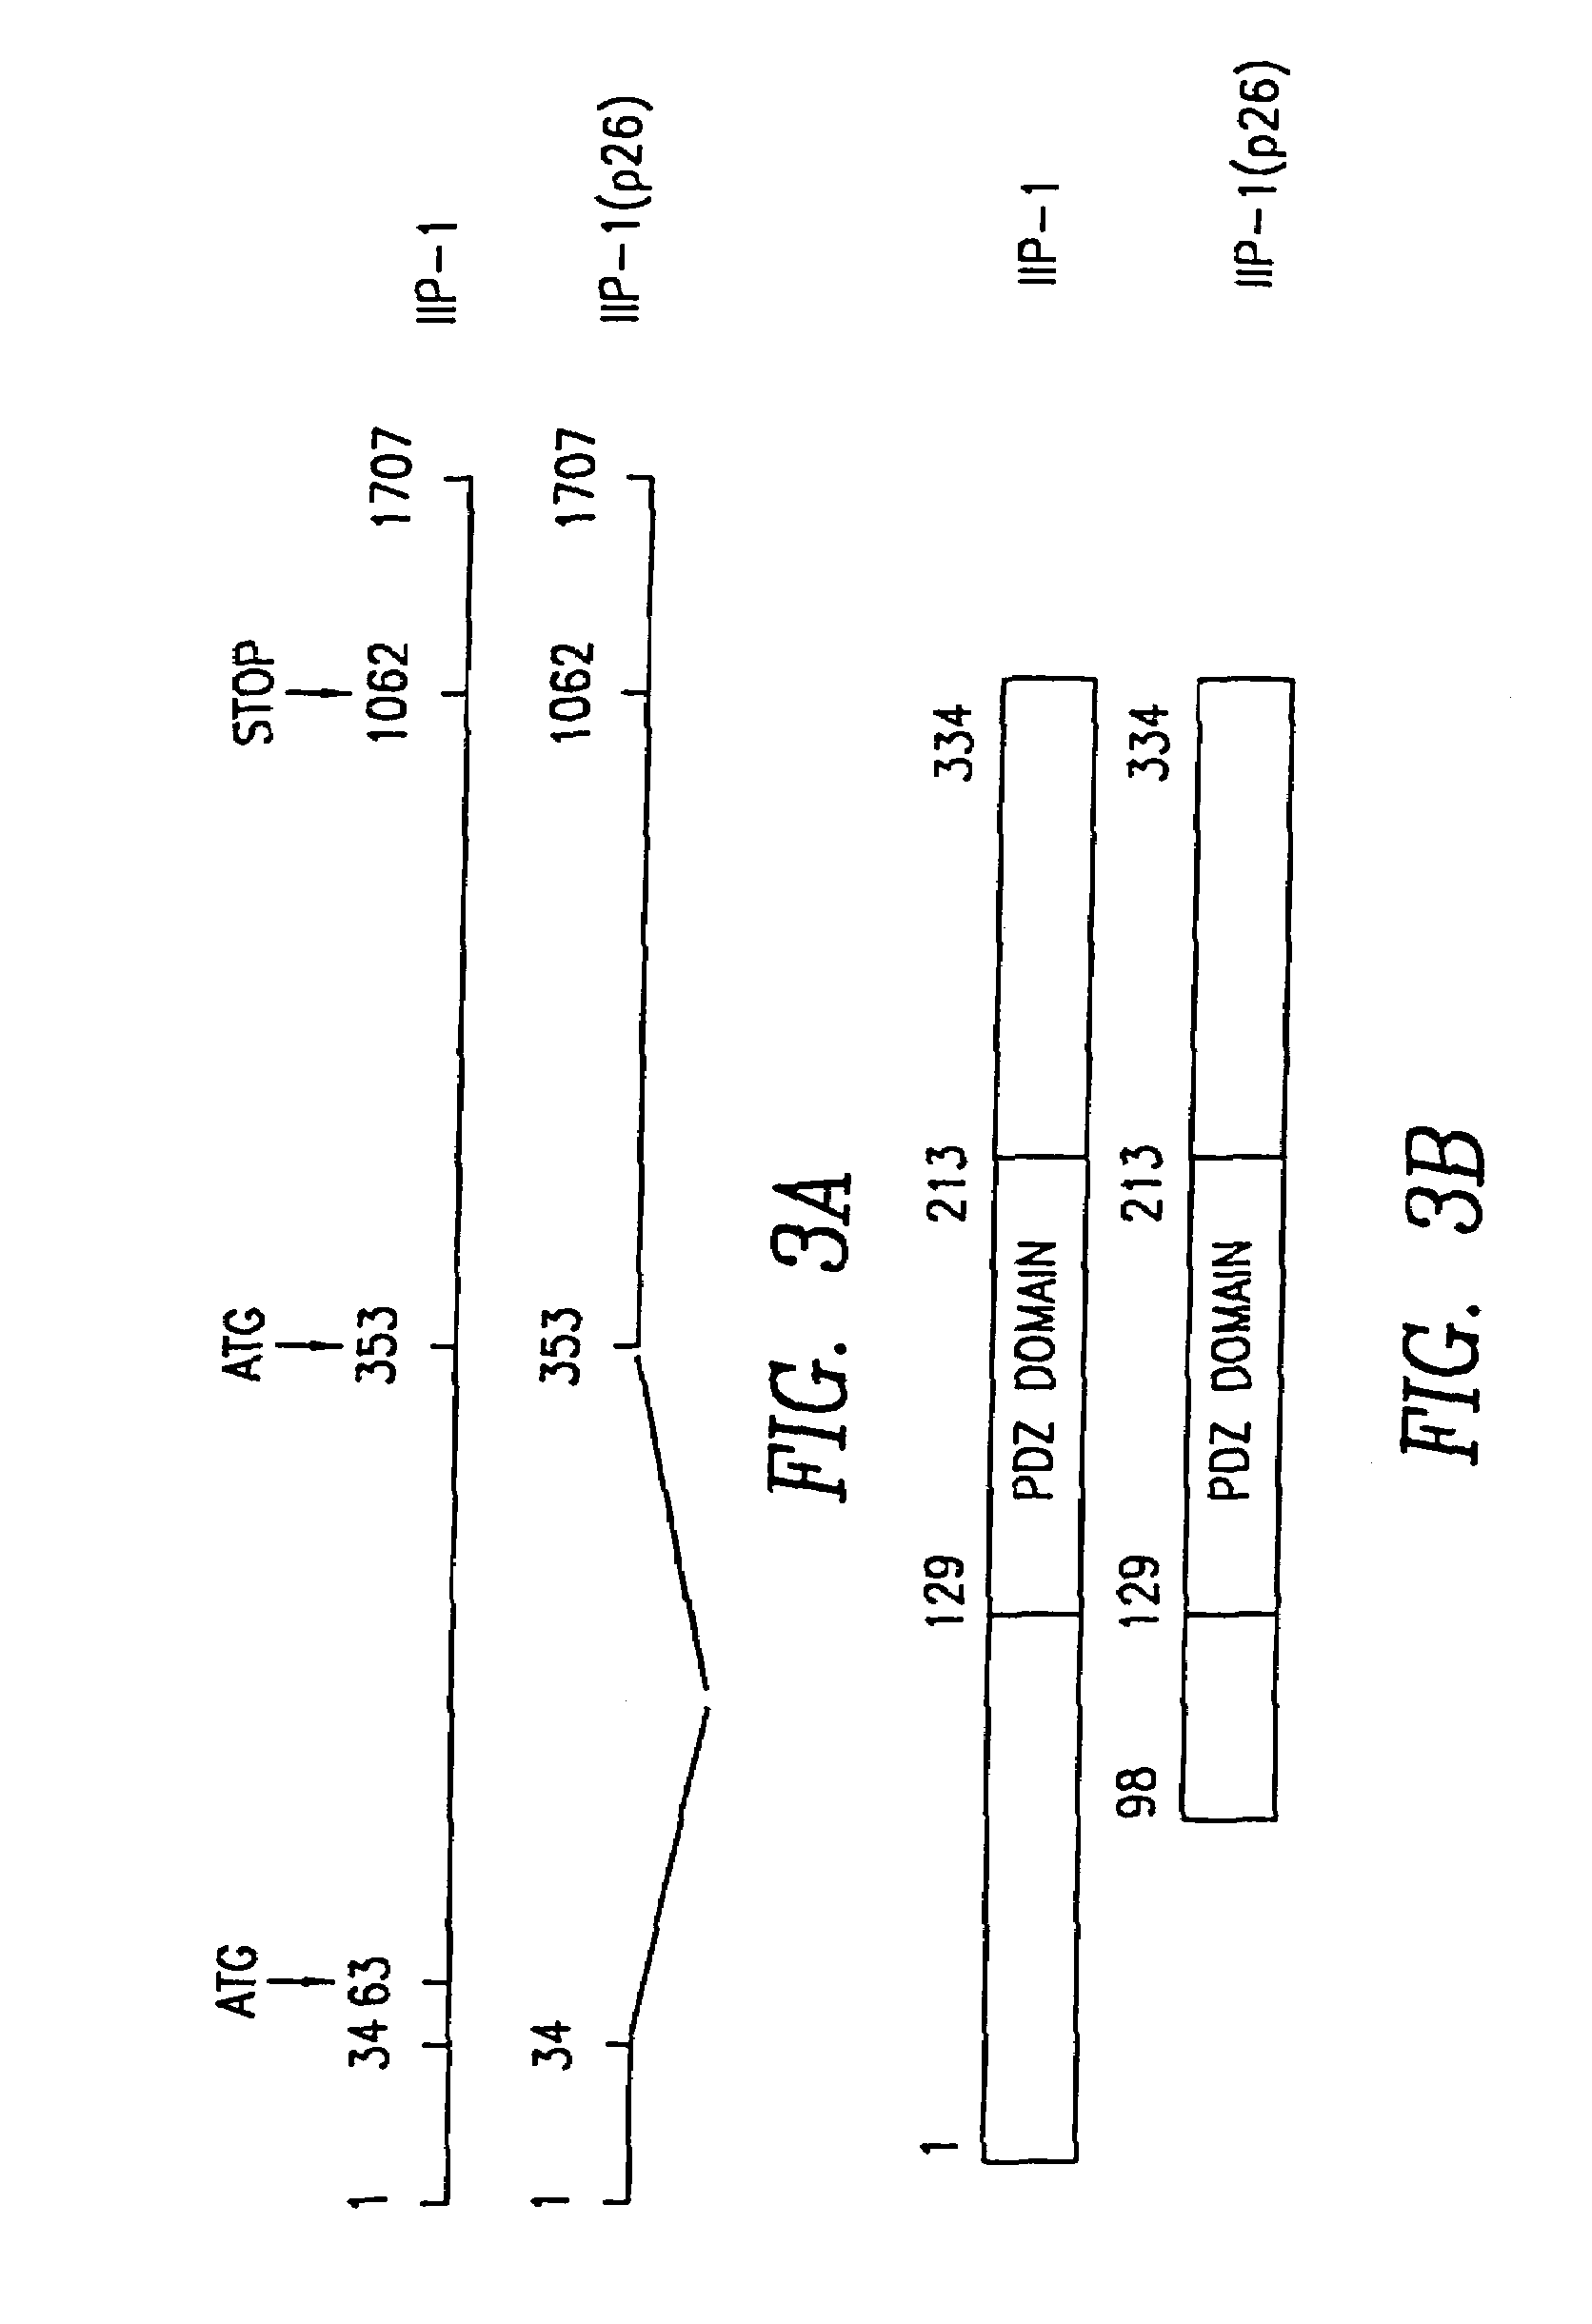 Methods for detecting cancer cells by using nucleic acid encoding for IGF-1 receptor interacting proteins